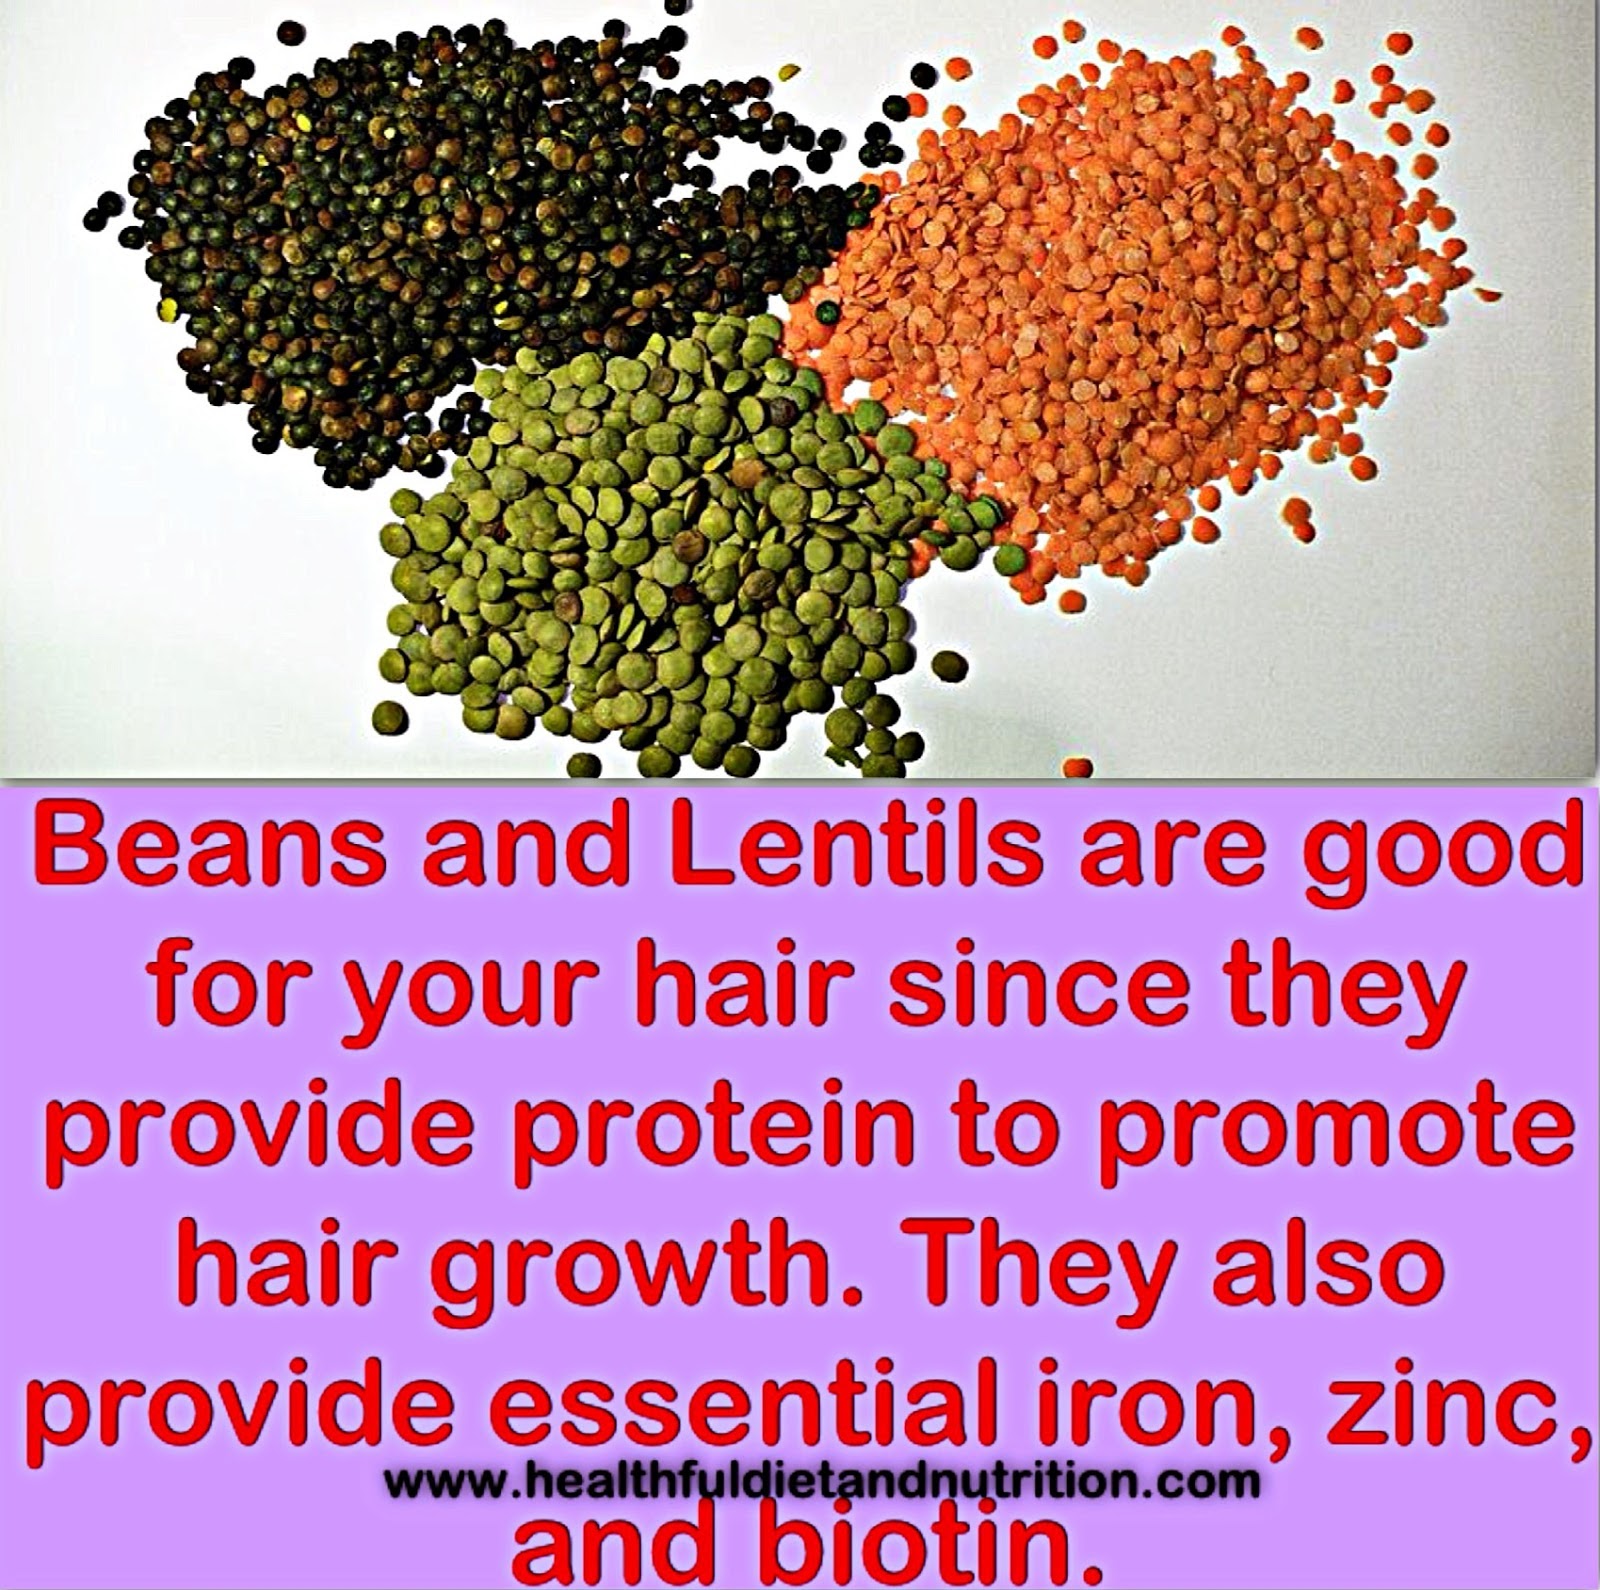 Eat Beans And Lentils For Hair Growth